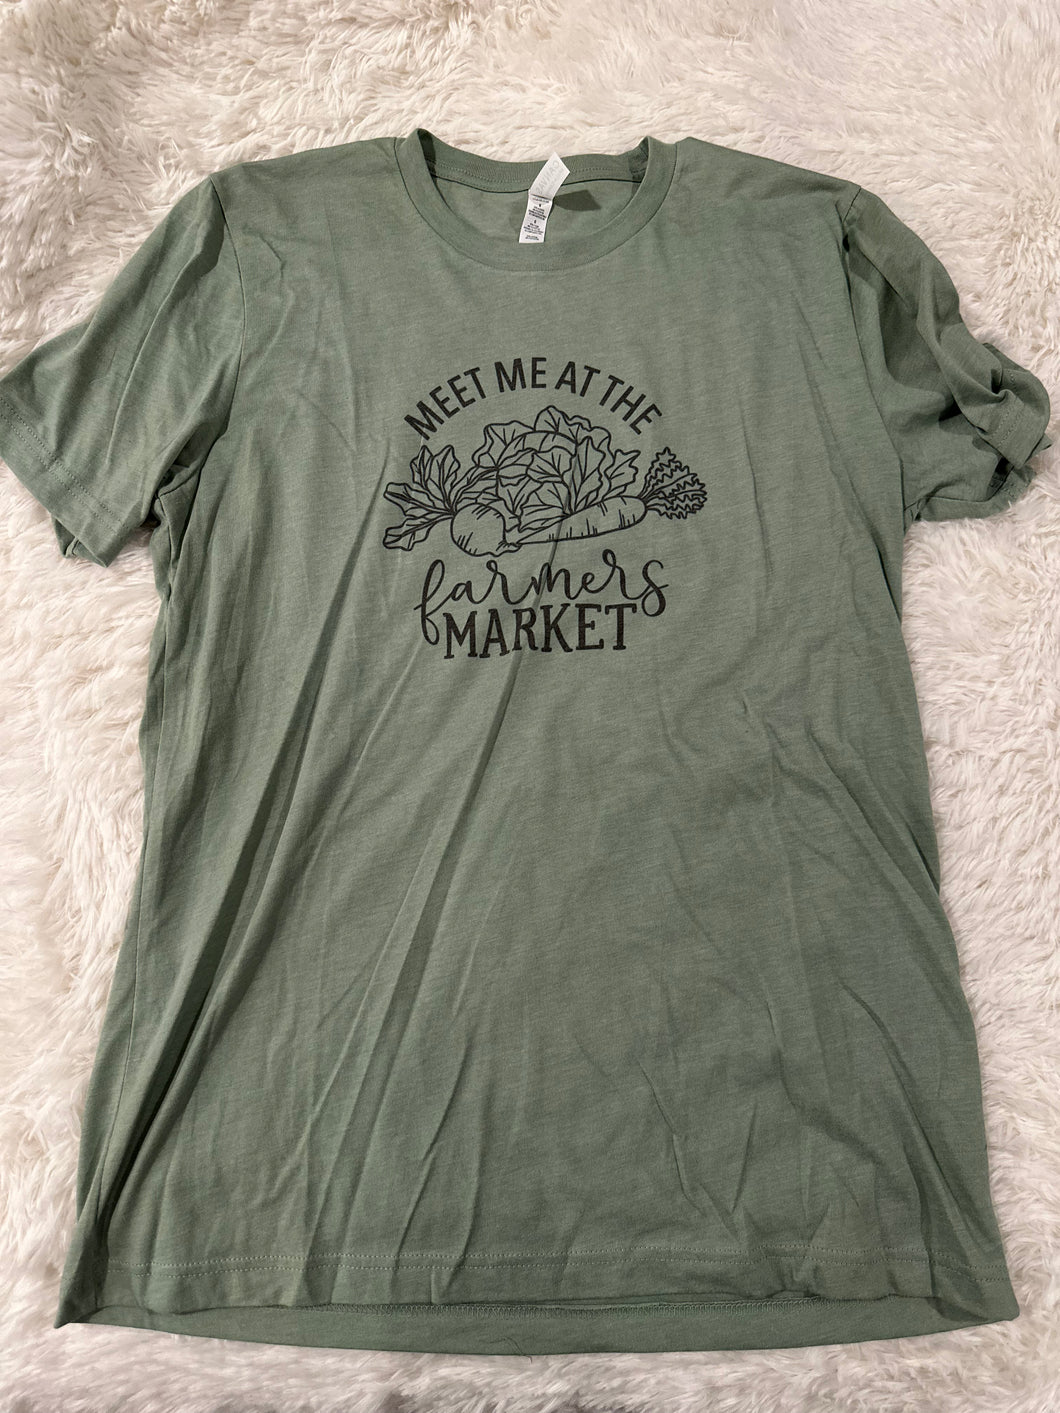 meet me at the farmers market T-shirt - SMALL